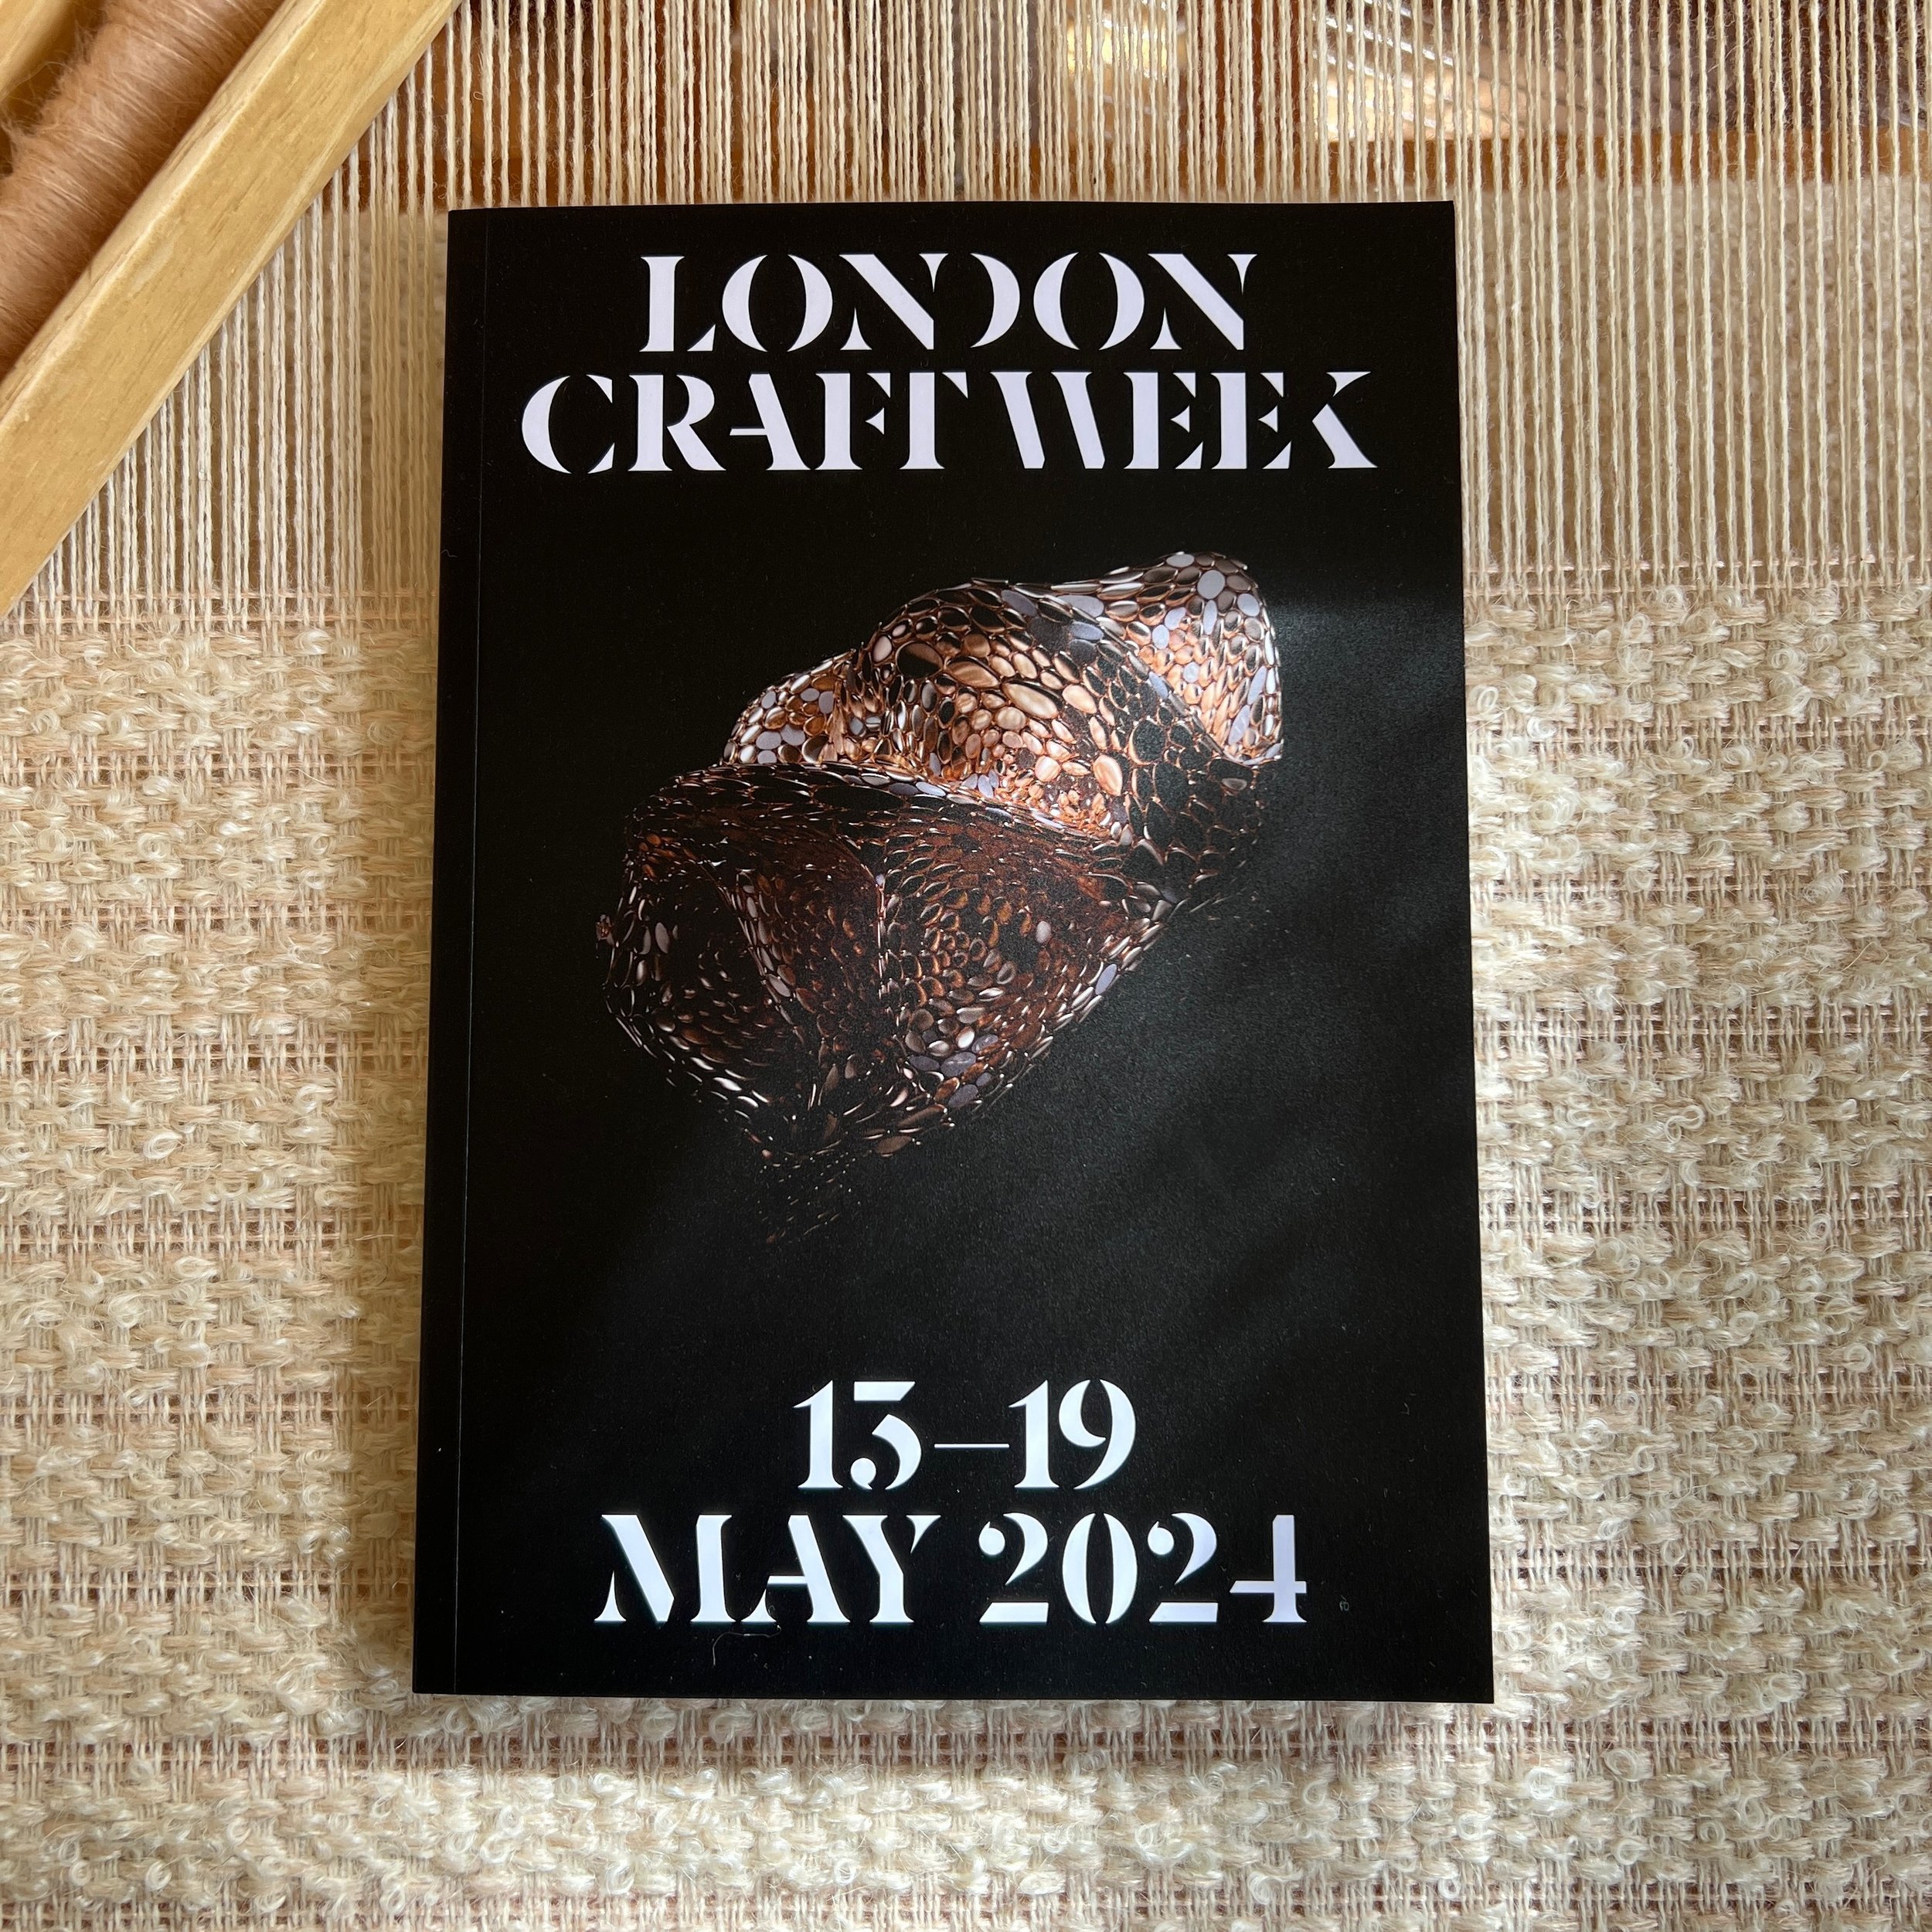 For this year&rsquo;s London Craft Week I&rsquo;m excited to be taking up residence at Rose Uniacke&rsquo;s esteemed Pimlico Road shop. During the week I will be weaving an exclusive fabric in store, which will in turn be transformed in to a limited 